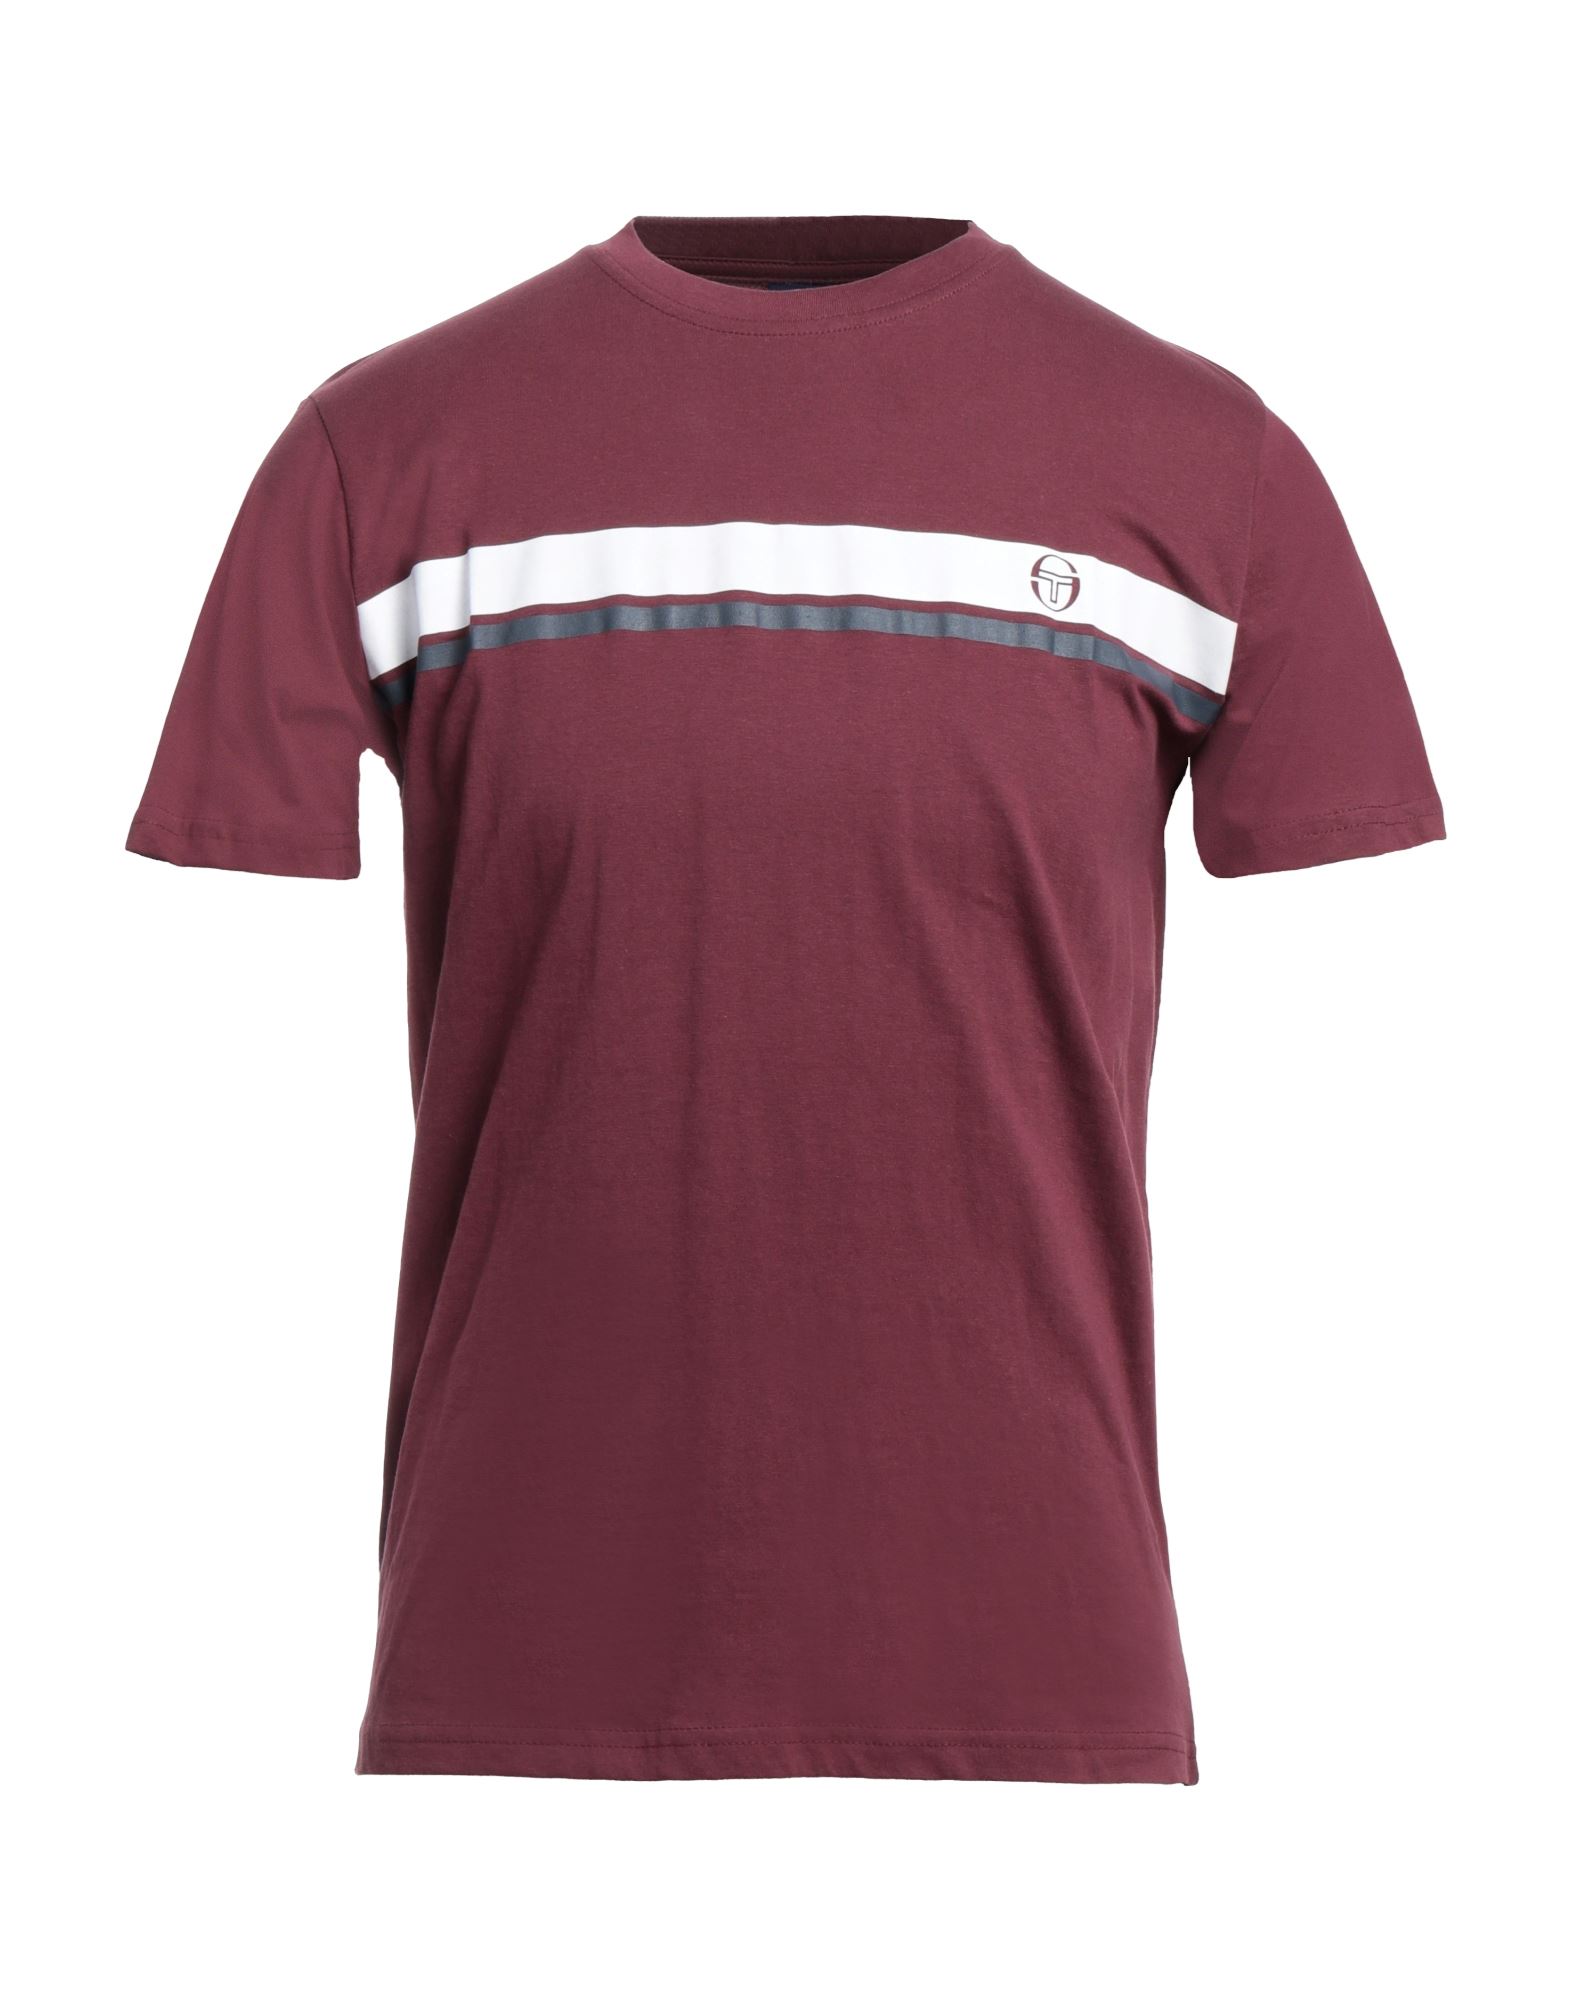 Sergio Tacchini Man T-shirt Burgundy Size Xl Cotton In Red